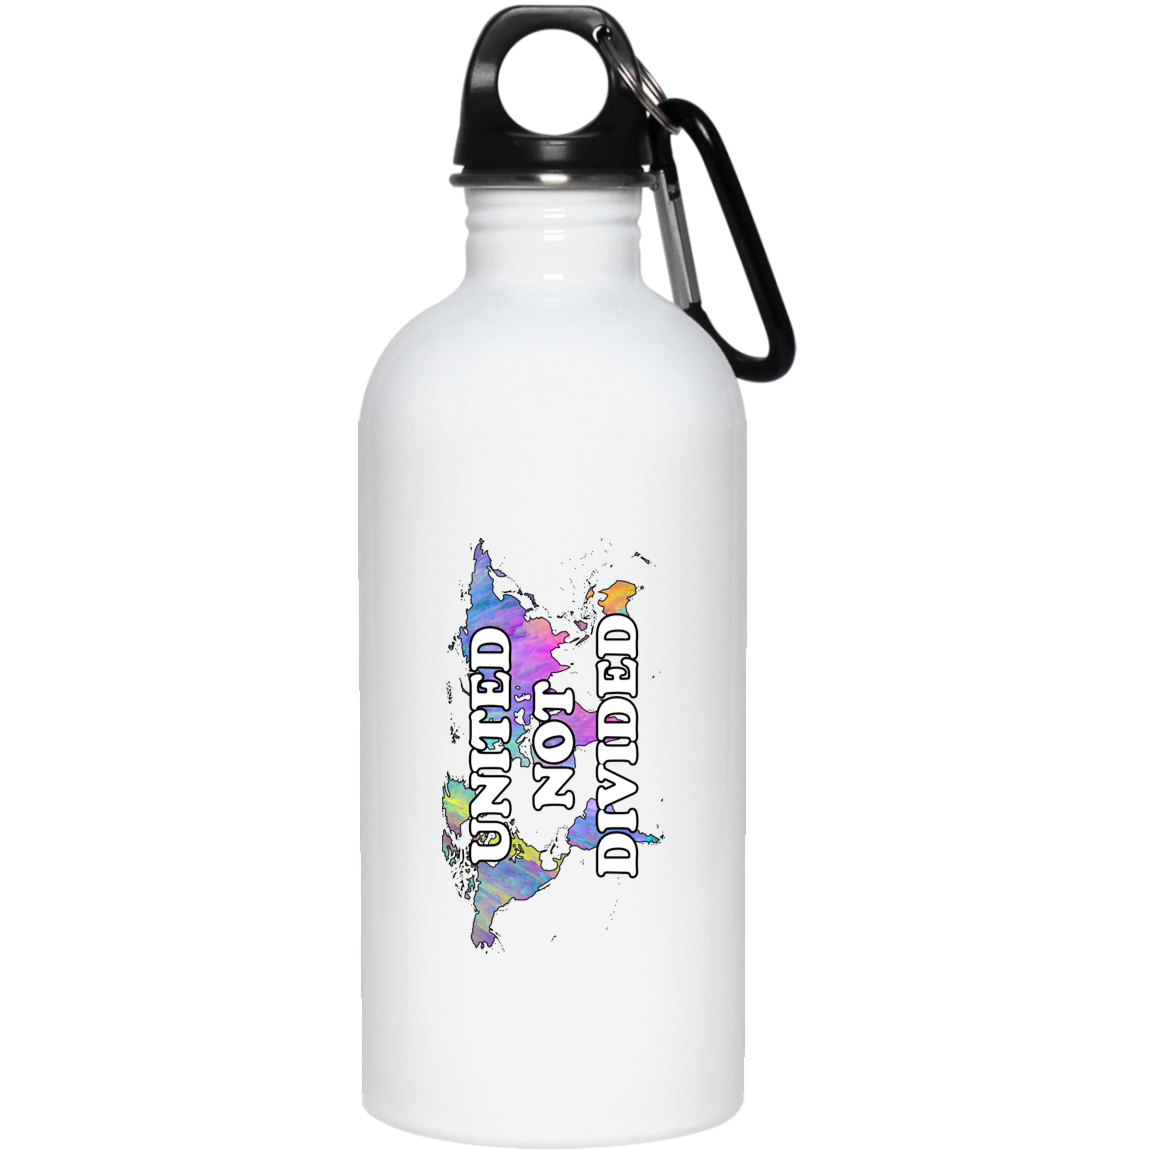 United Not Divided World 20 oz. Stainless Steel Water Bottle